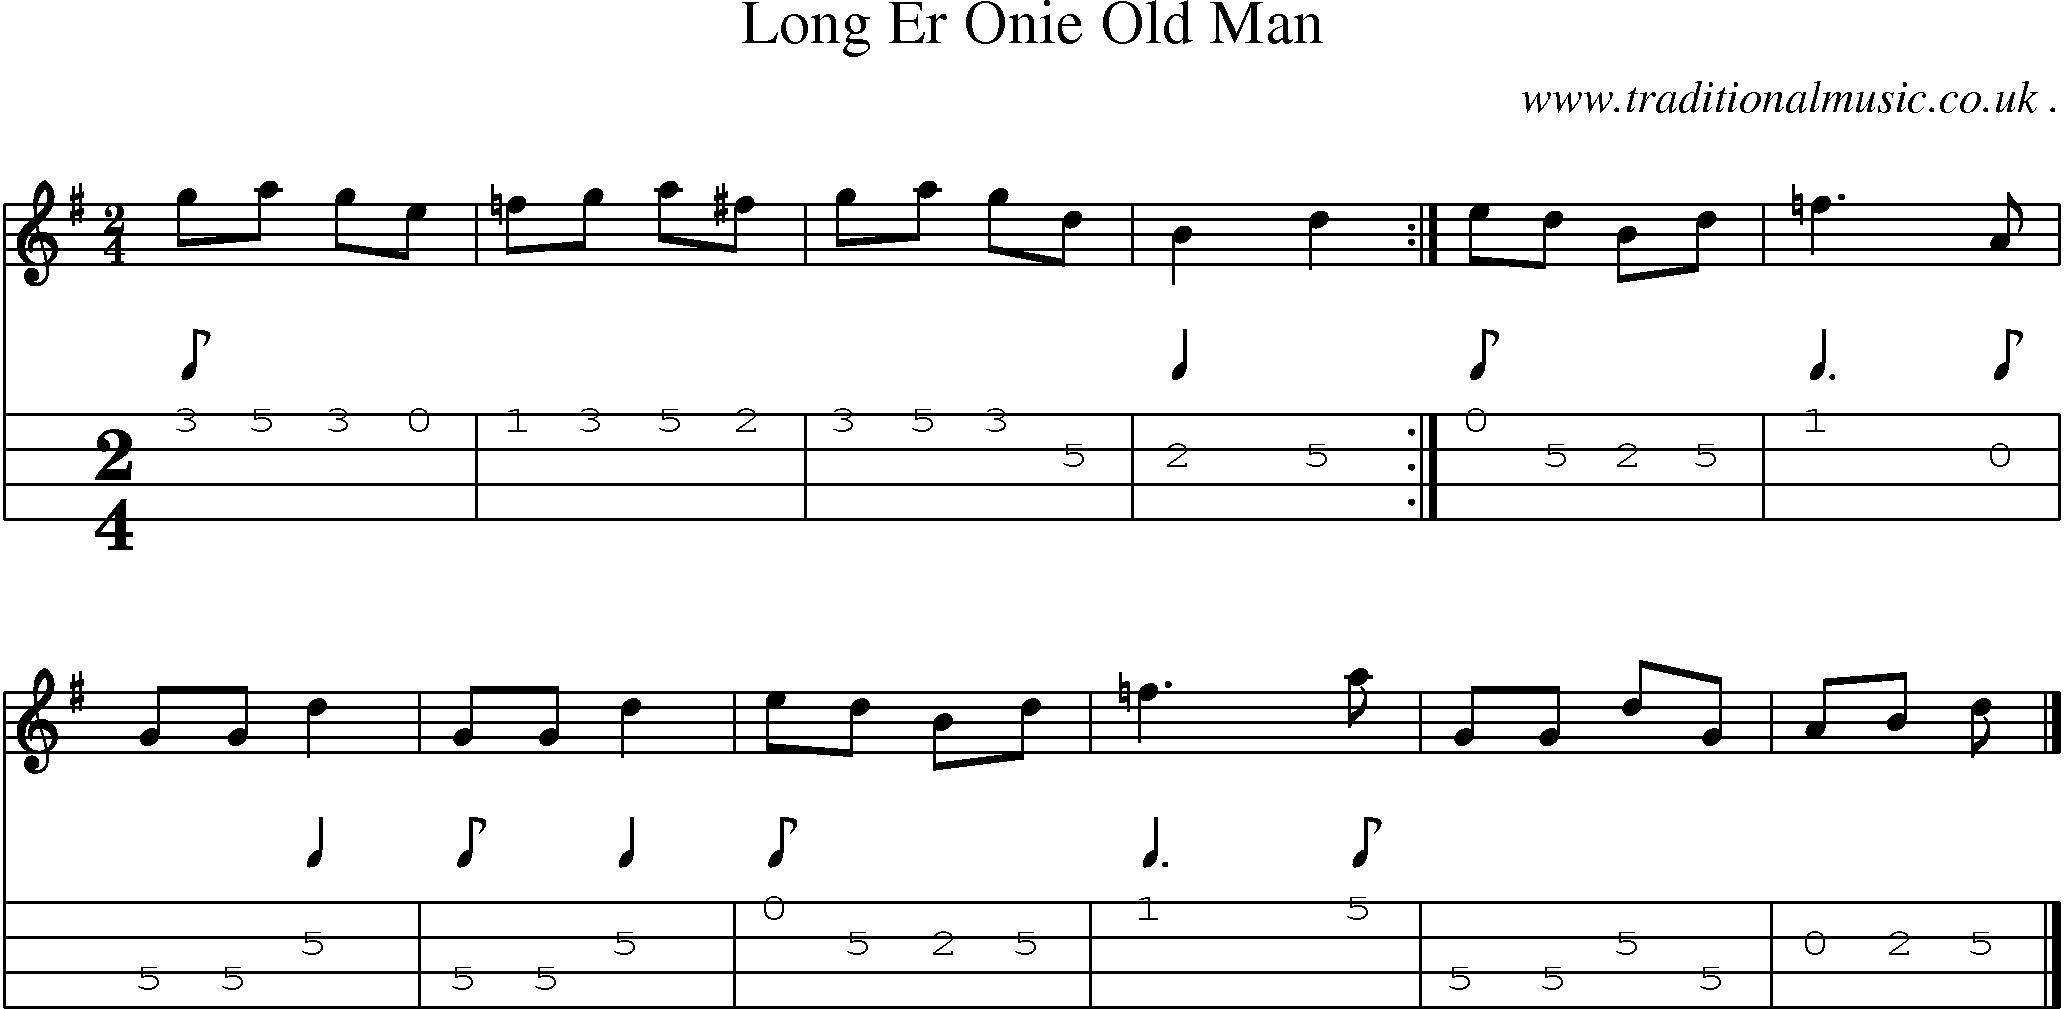 Sheet-music  score, Chords and Mandolin Tabs for Long Er Onie Old Man